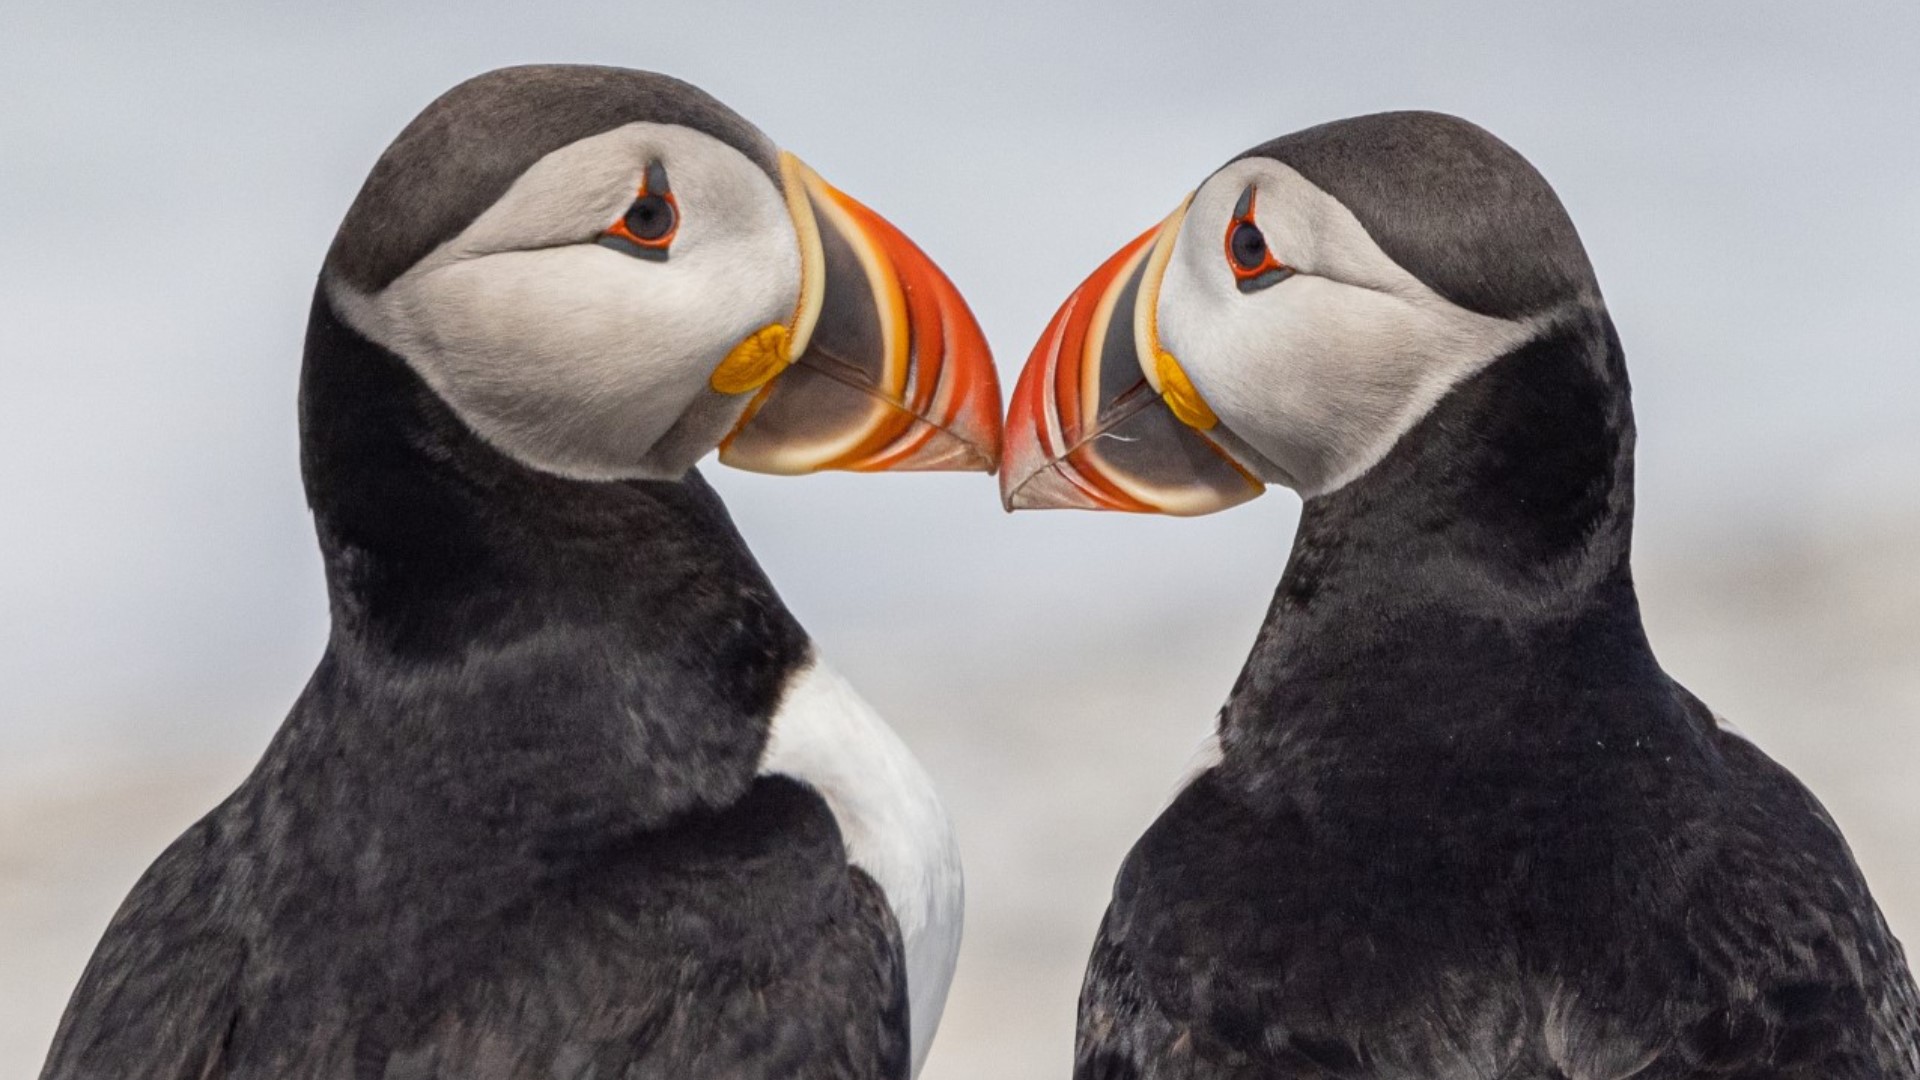 NEWS CENTER Maine has adopted a puffin through the Audubon Society's Seabird Institute, just one of its fundraisers to protect puffin colonies.